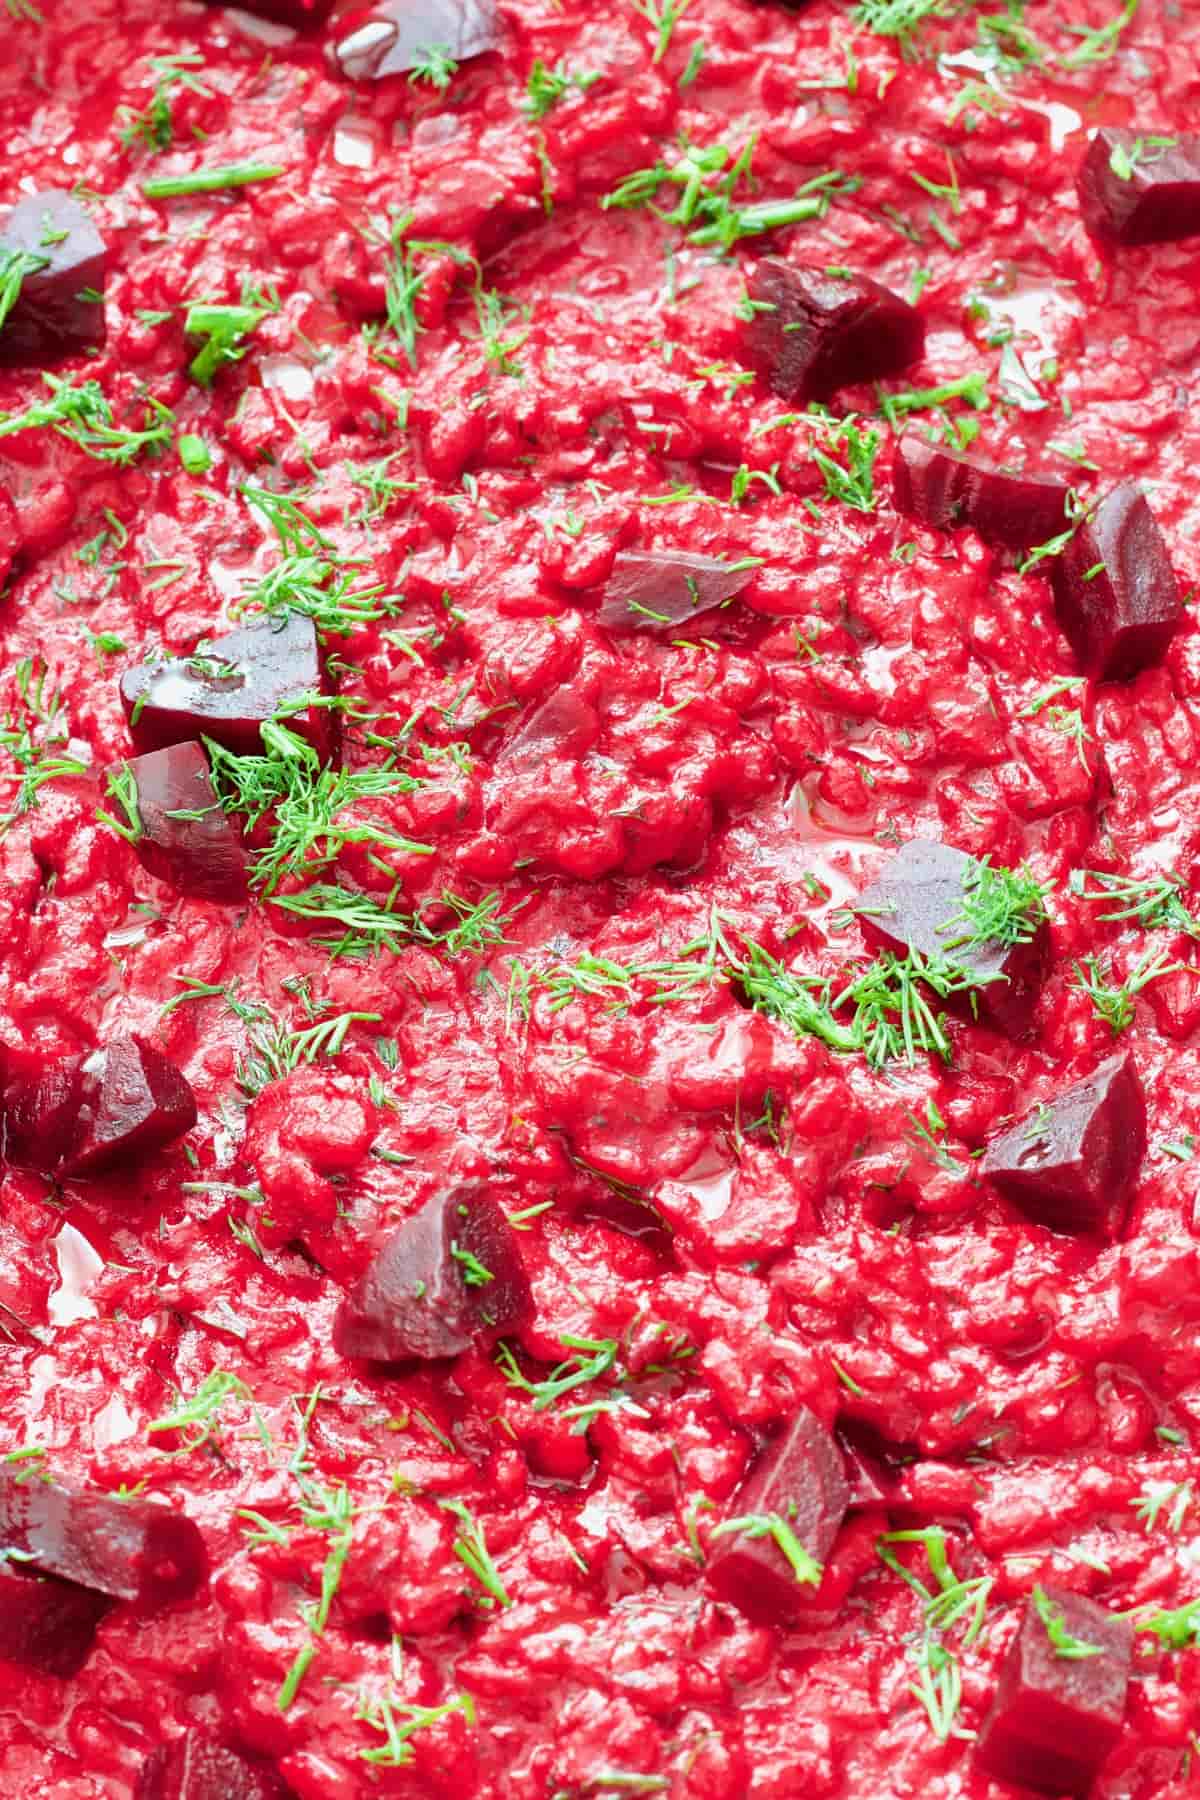 Beetroot risotto with chunks of beetroot and fresh dill garnish.